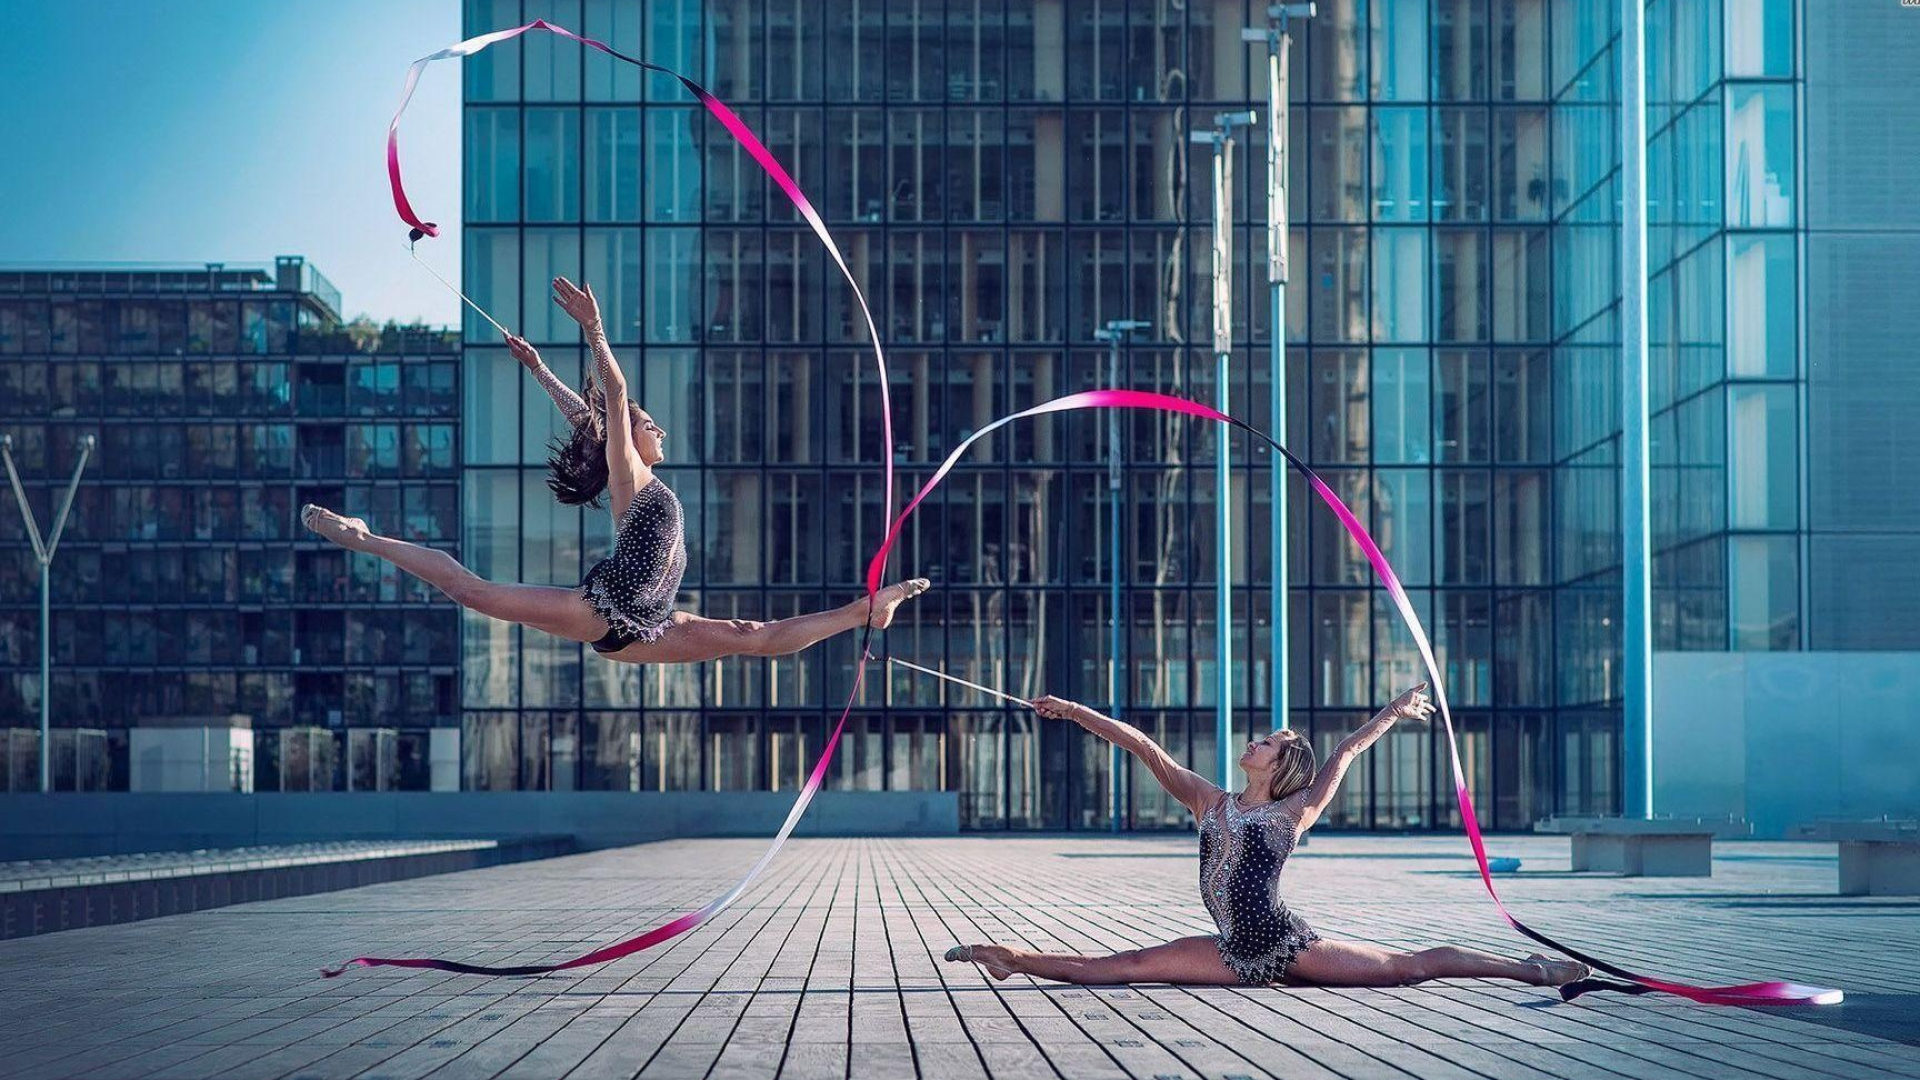 Acrobatic Sports: Tricks with the ribbons, AG couple, Aesthetic. 1920x1080 Full HD Wallpaper.